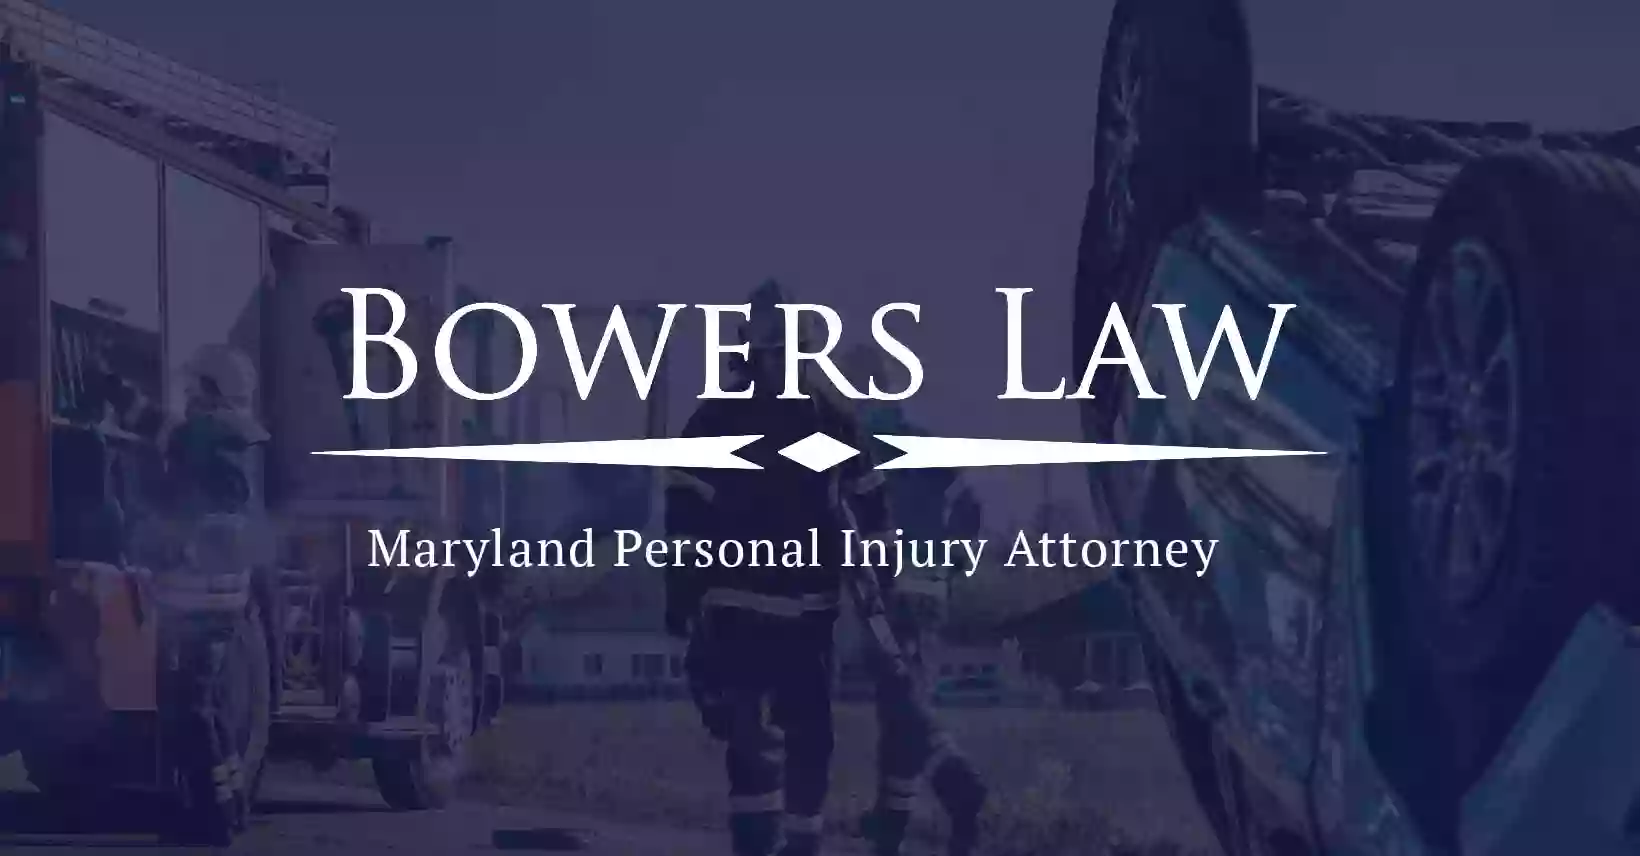 Ocean City Auto Accident Lawyers Bowers, Hassan & Herndon